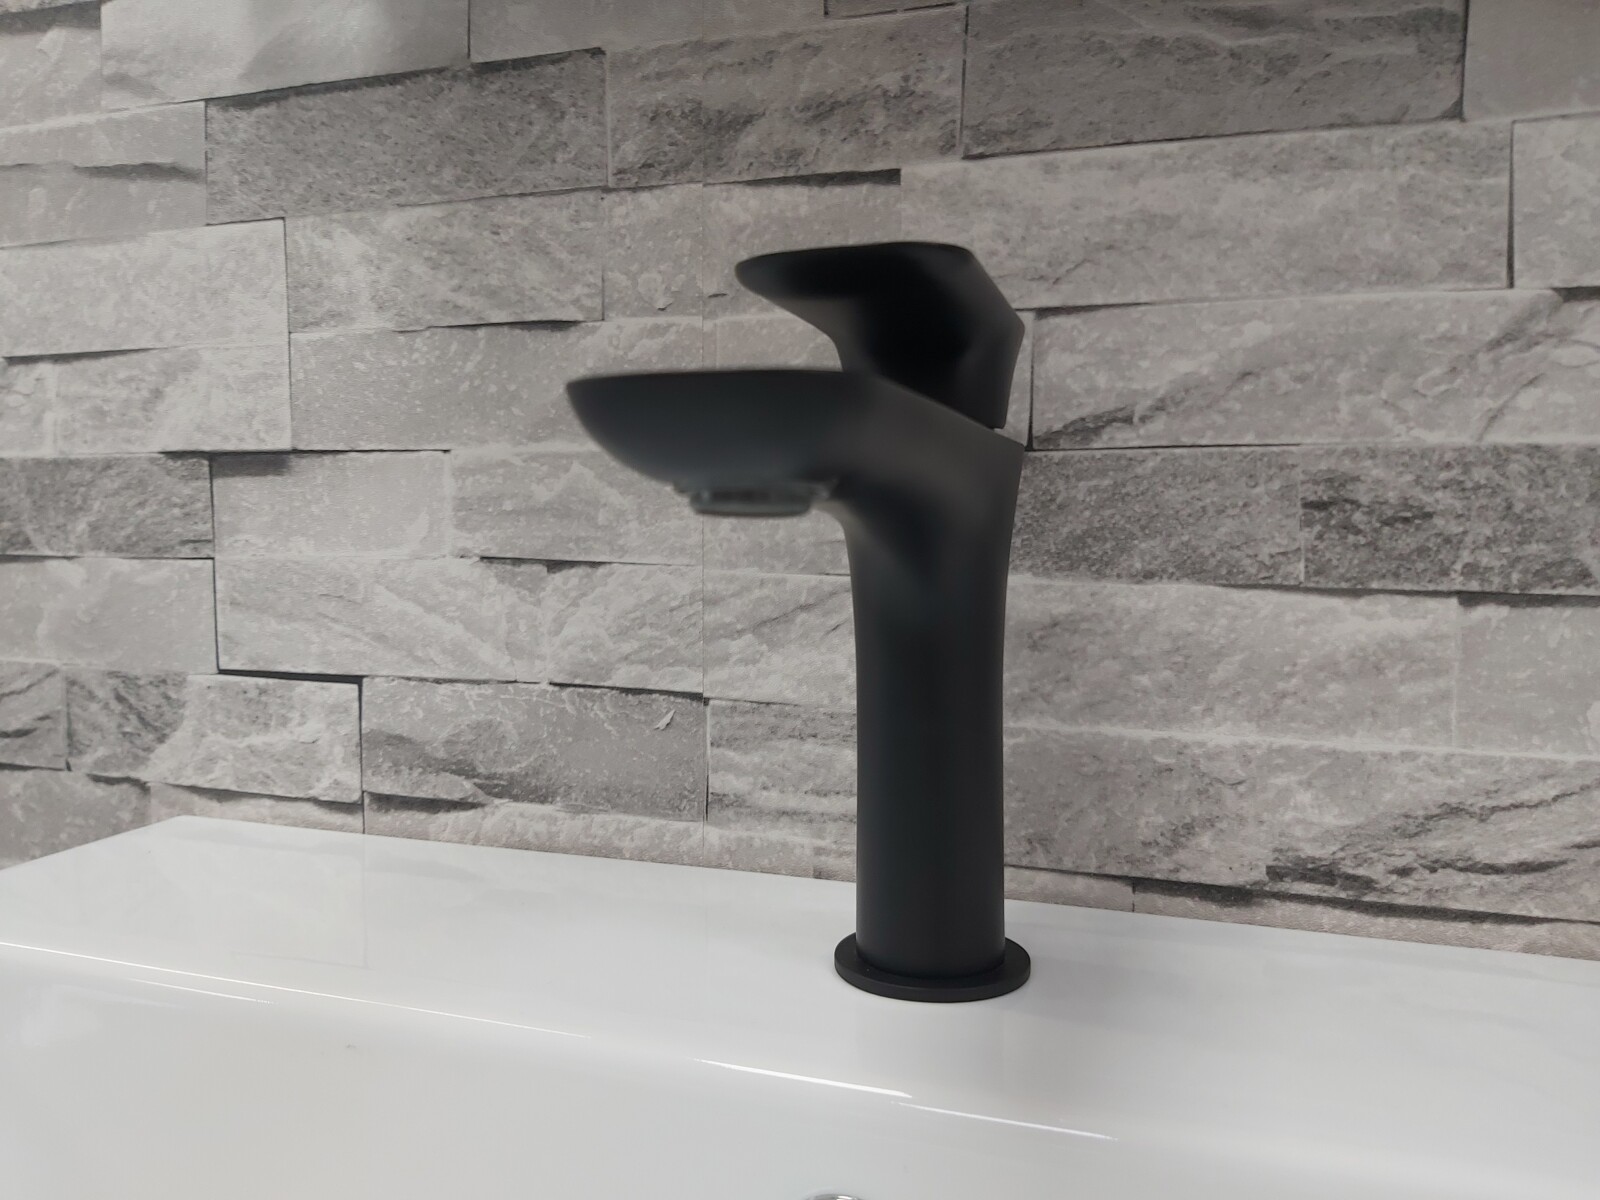 Image of a basin mixer tap finished in matt black